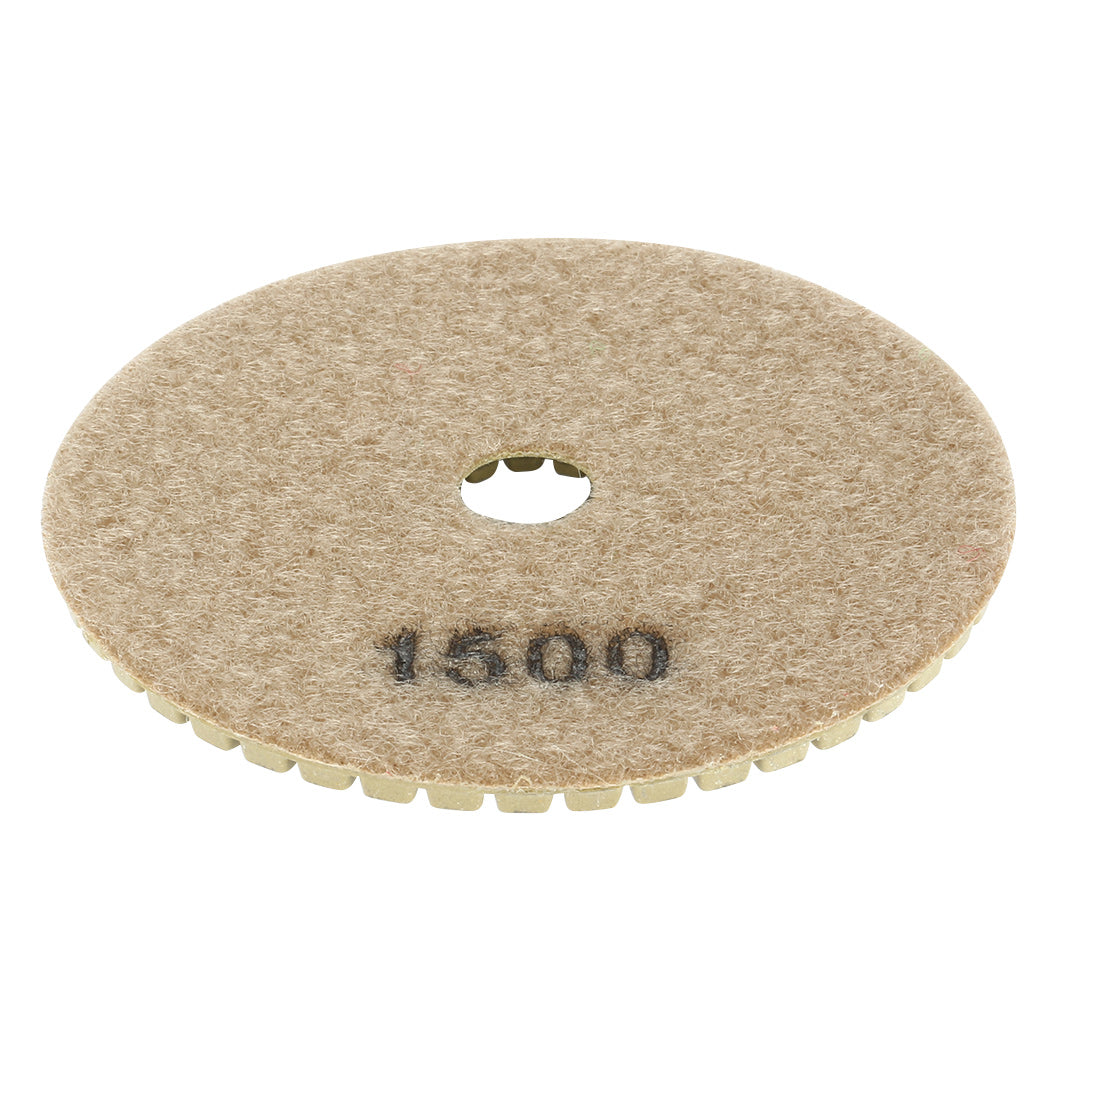 uxcell Uxcell 4" Diamond Wet Polishing Pad Grit 1500 10pcs for Granite Concrete Marble